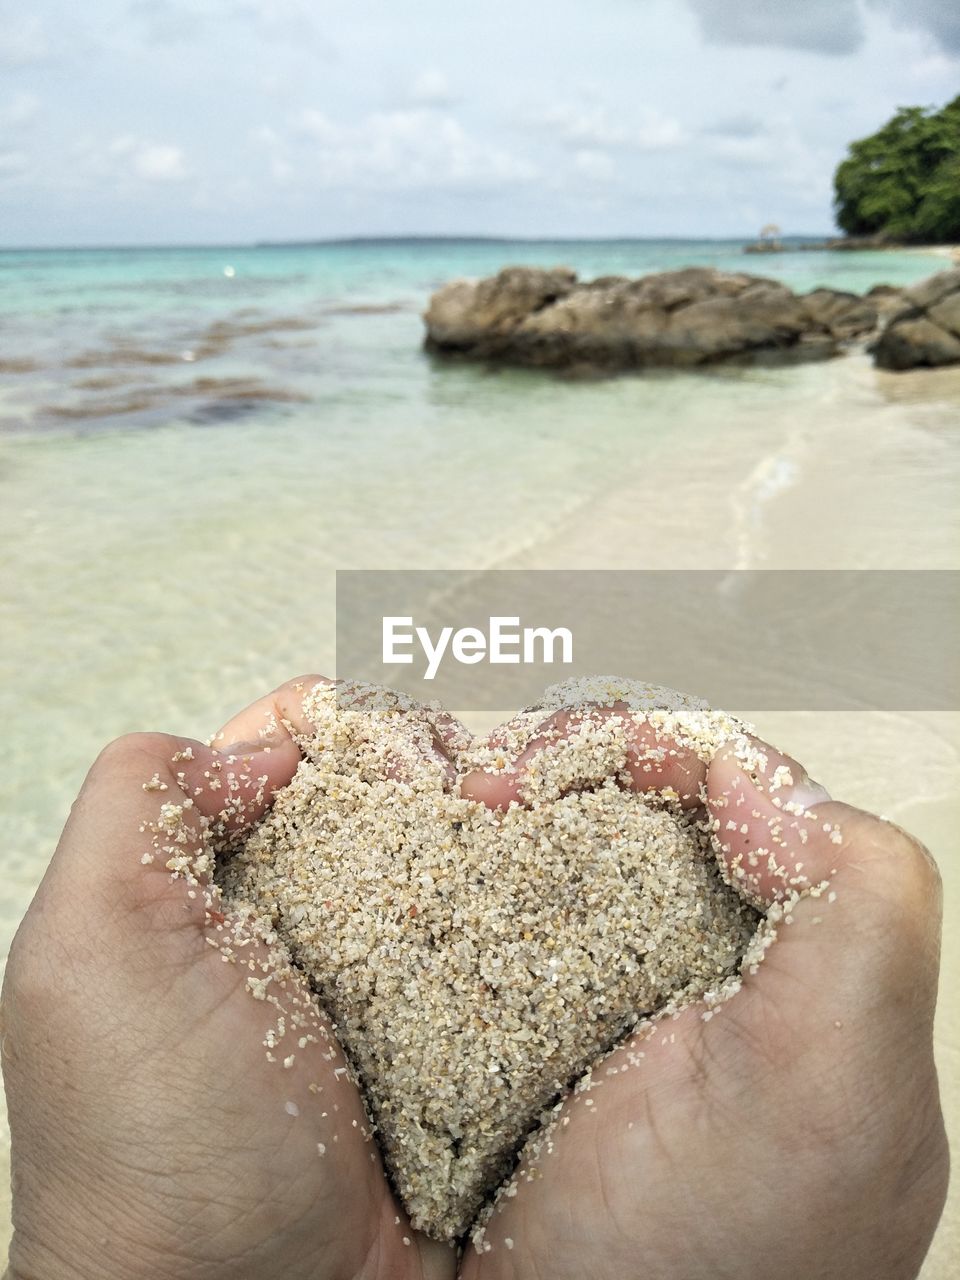 Cropped hands forming heart shape with wet sand at beach